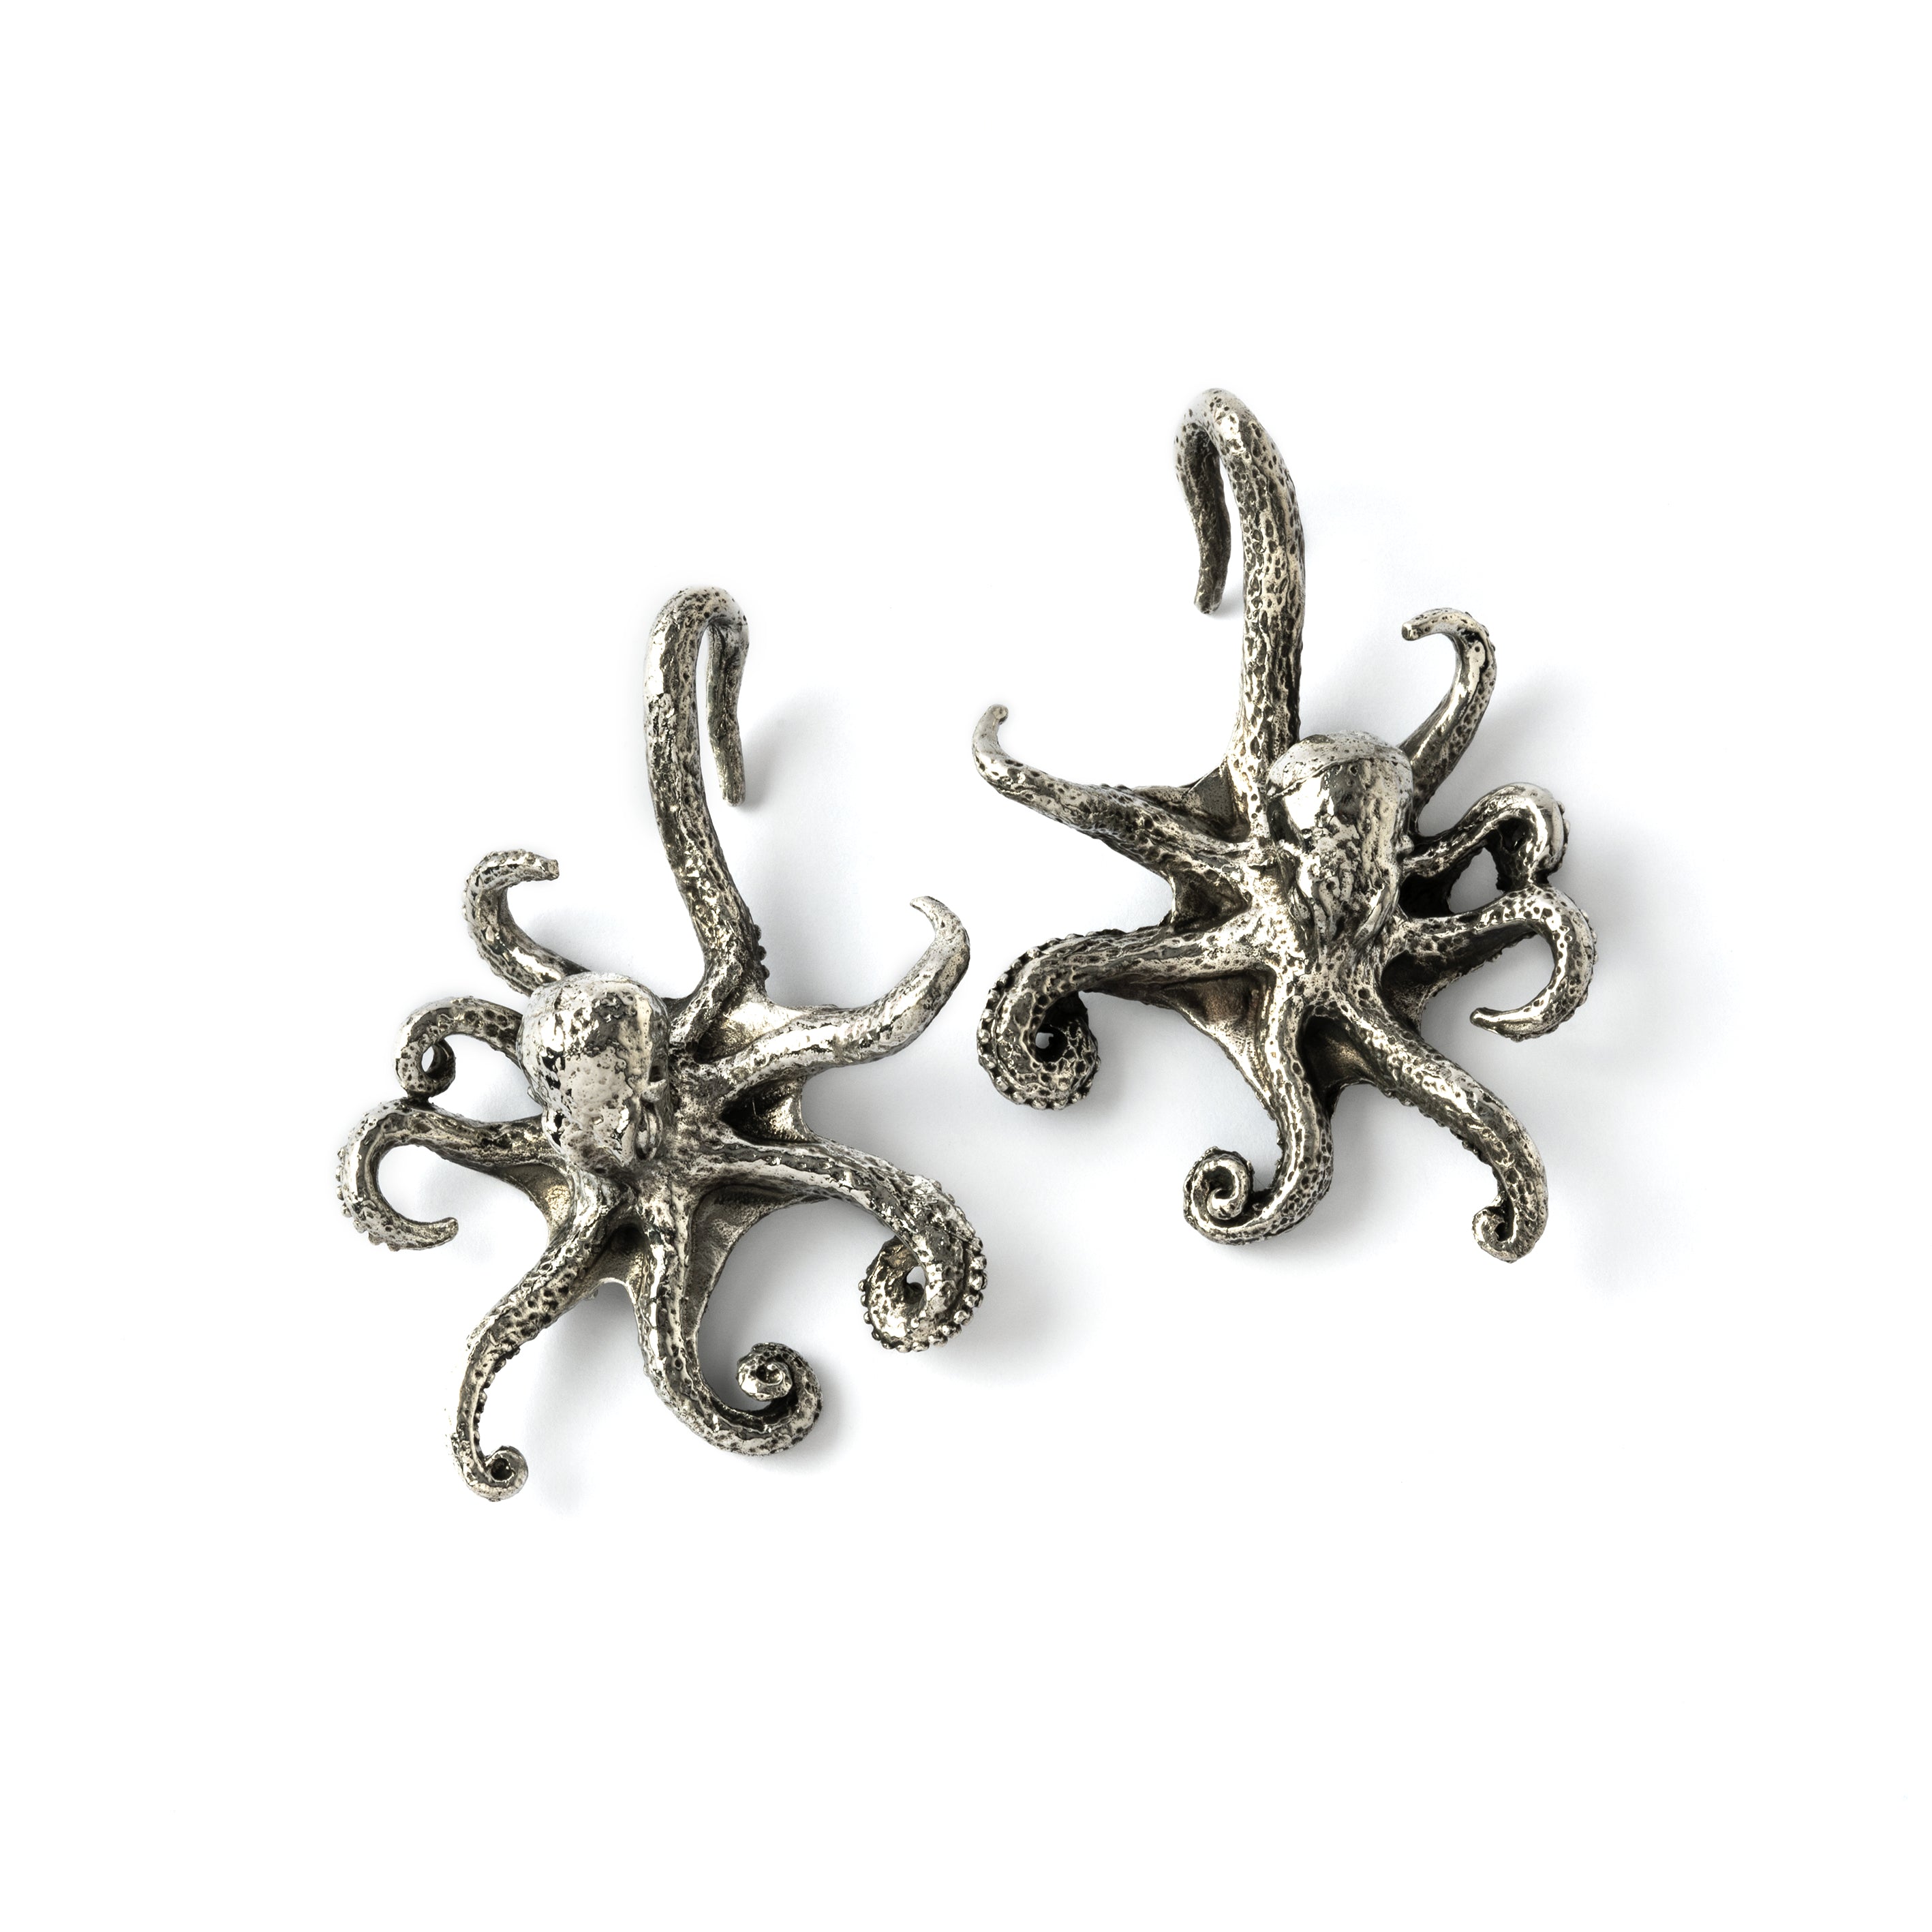 pair of silver brass Octopus ear weights hangers frontal view